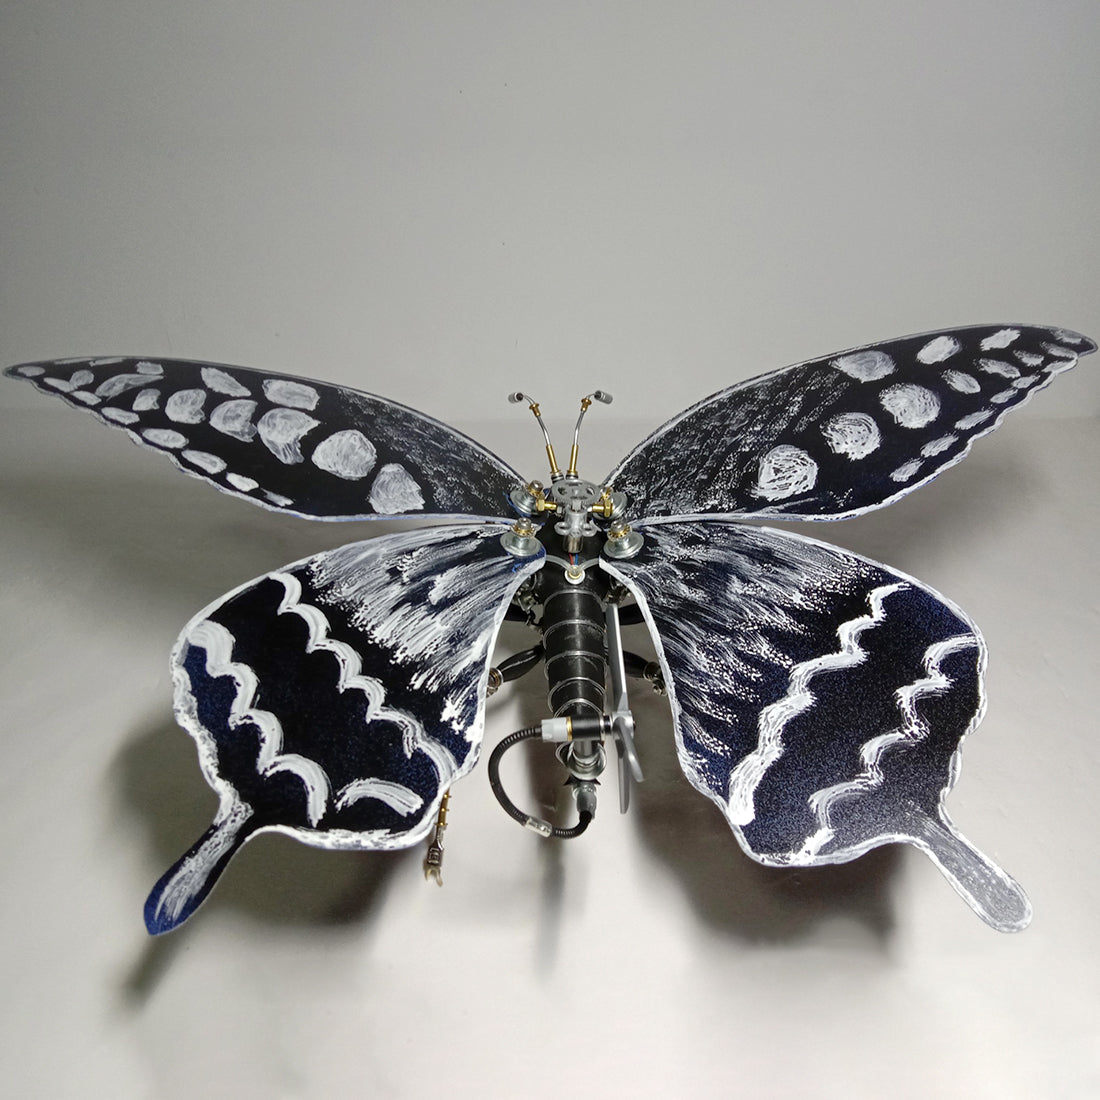 Mechanical Metal Black and White Butterfly Steampunk Insect Sculpture Art  Assembled